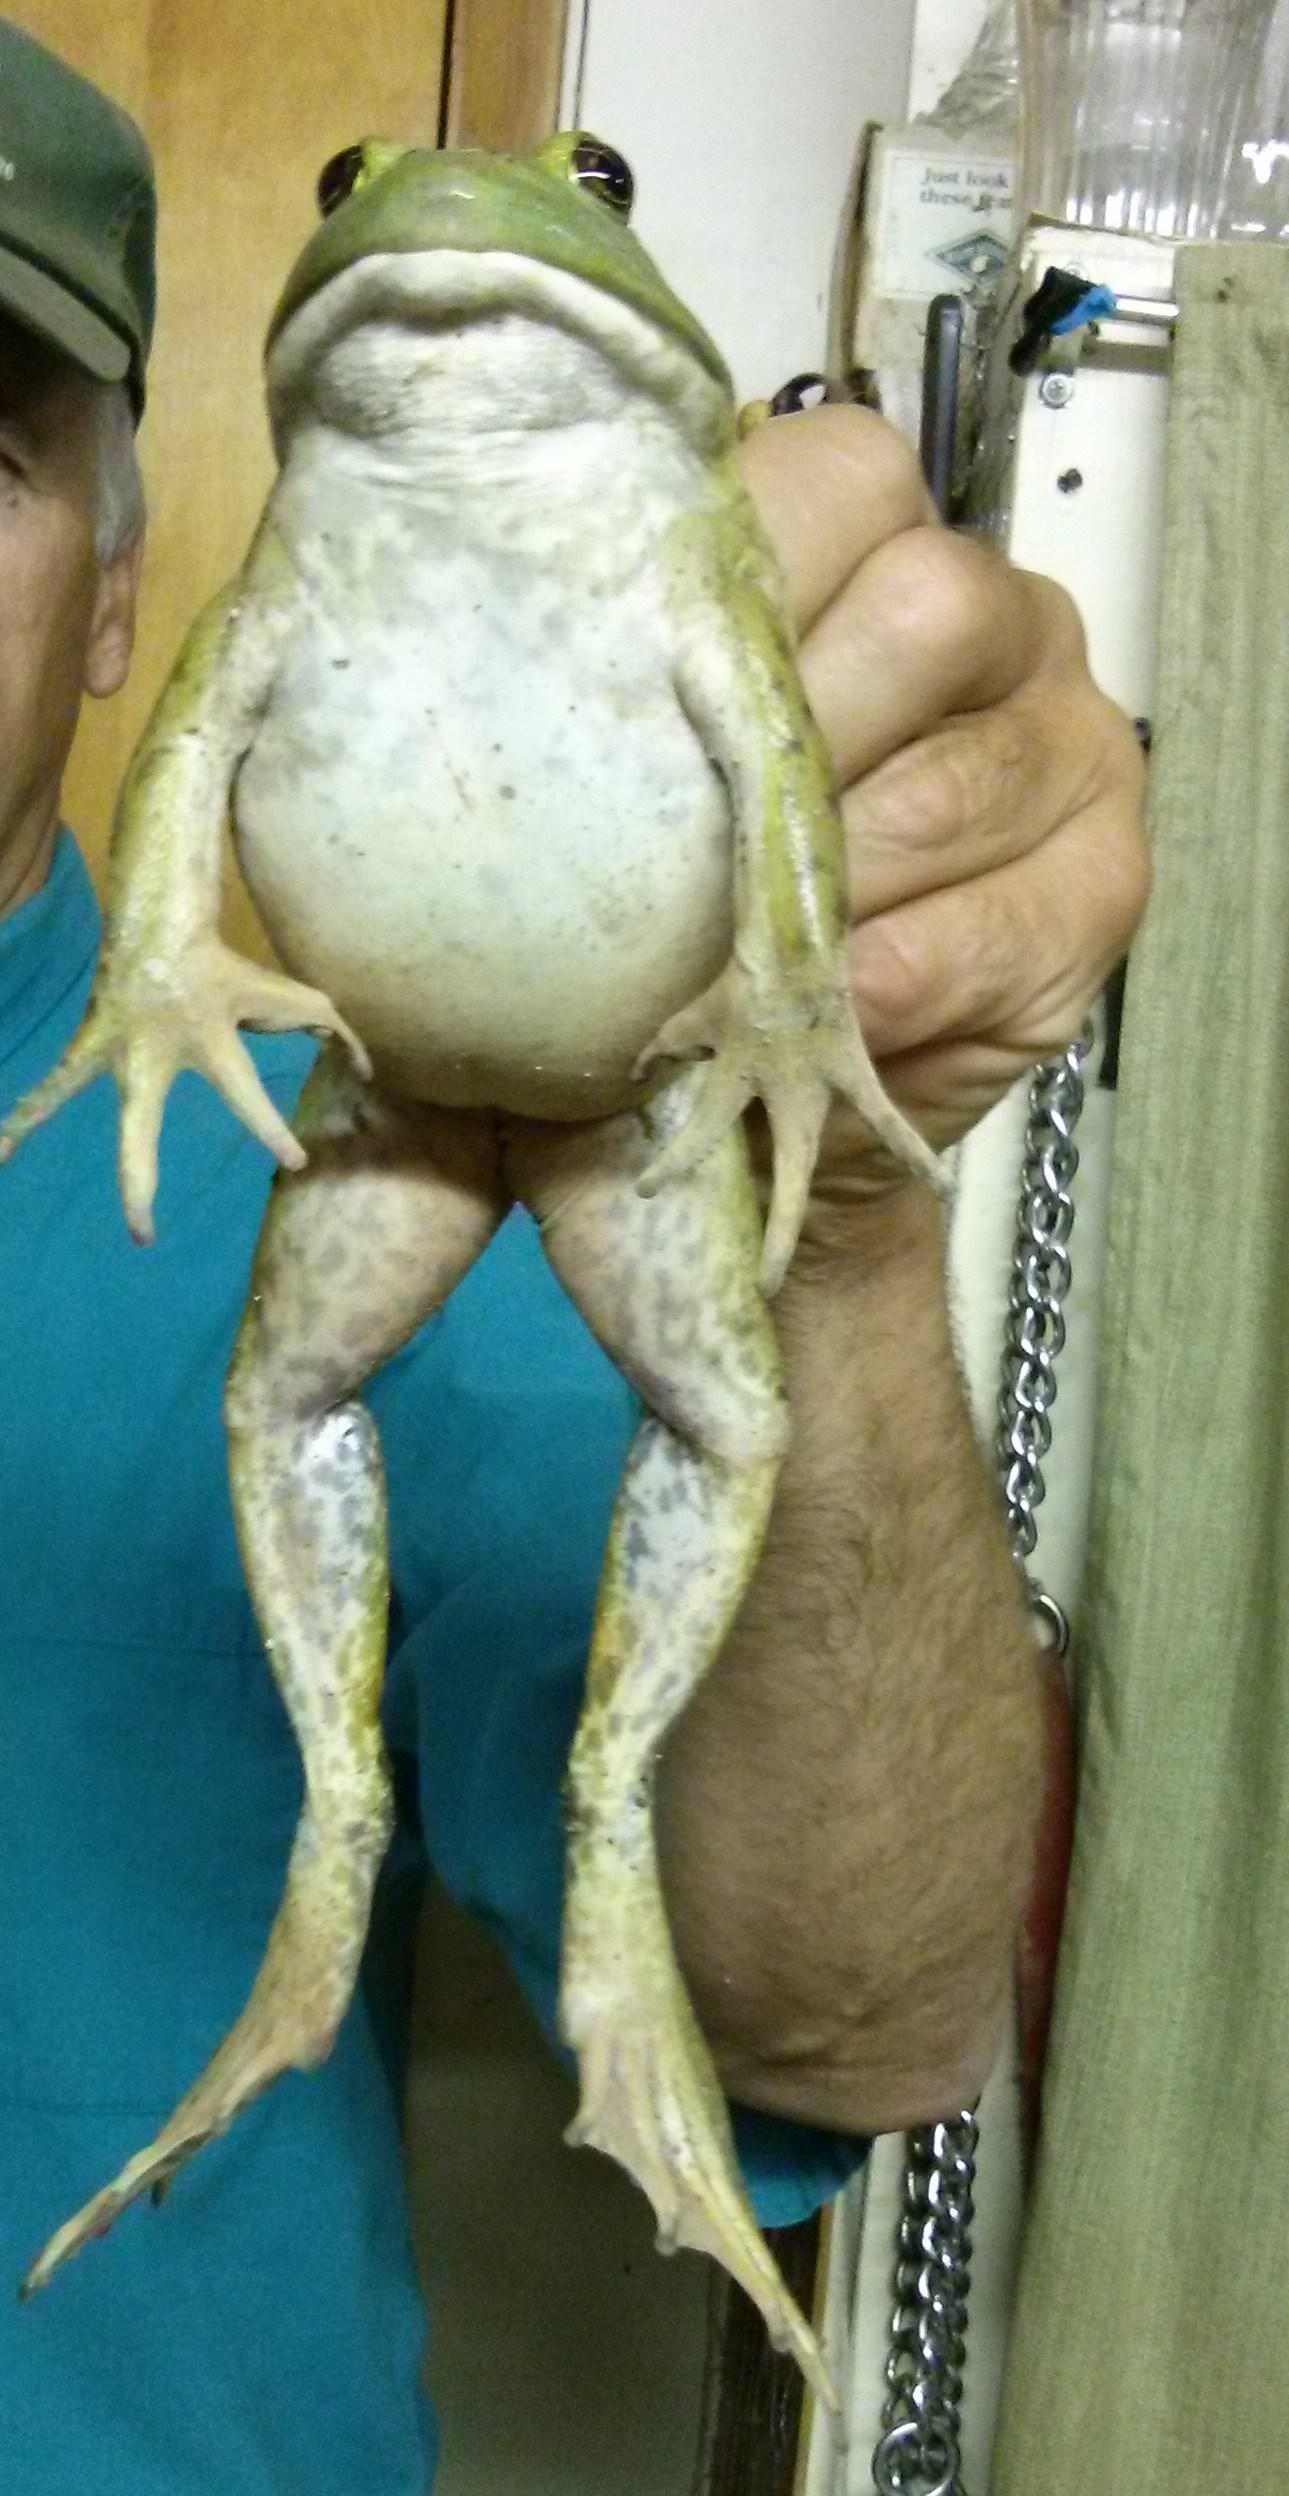 American Bullfrogs are the largest and most recognizable of frogs.